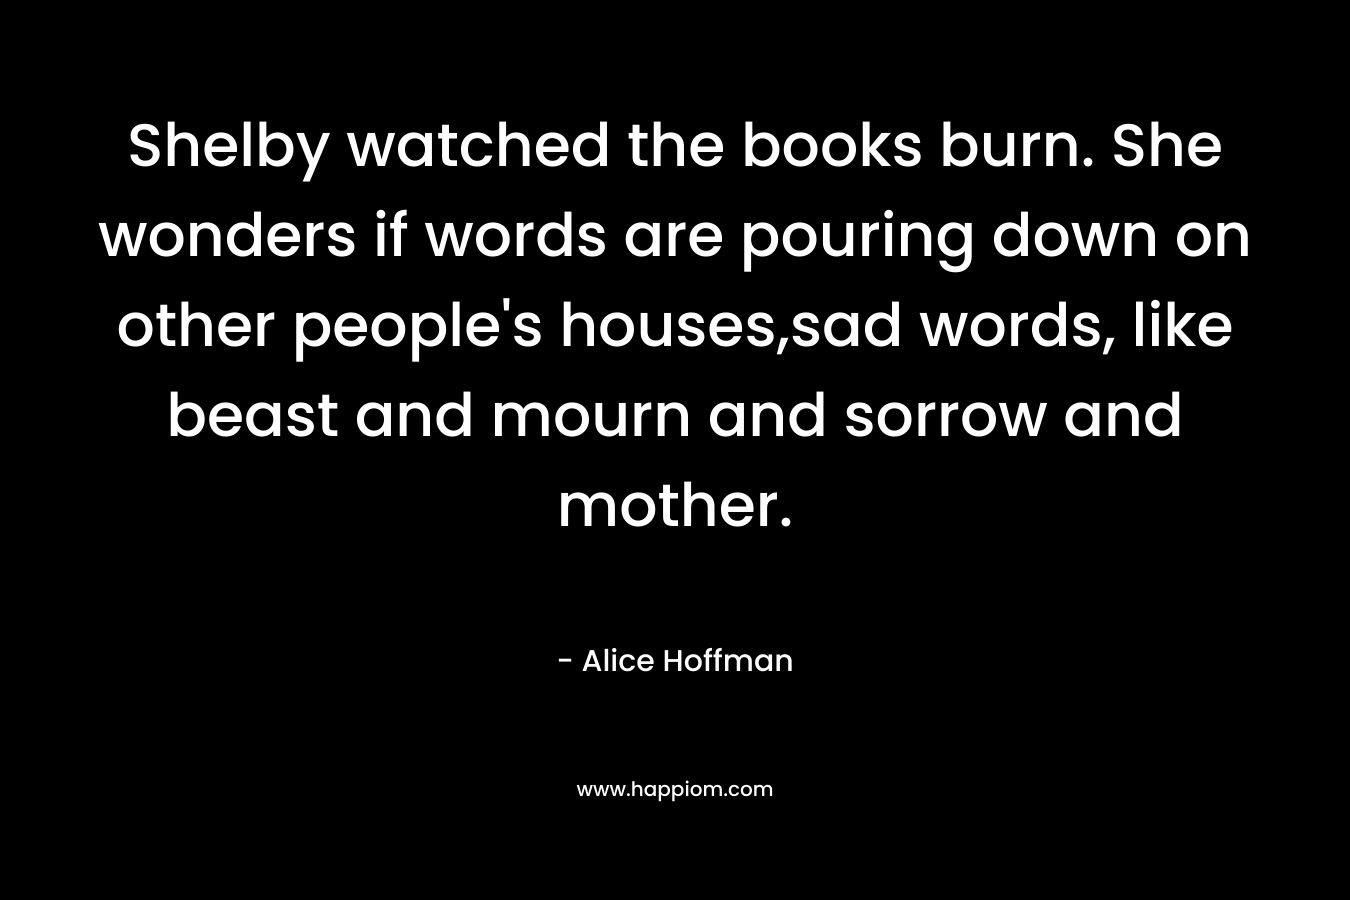 Shelby watched the books burn. She wonders if words are pouring down on other people’s houses,sad words, like beast and mourn and sorrow and mother. – Alice Hoffman